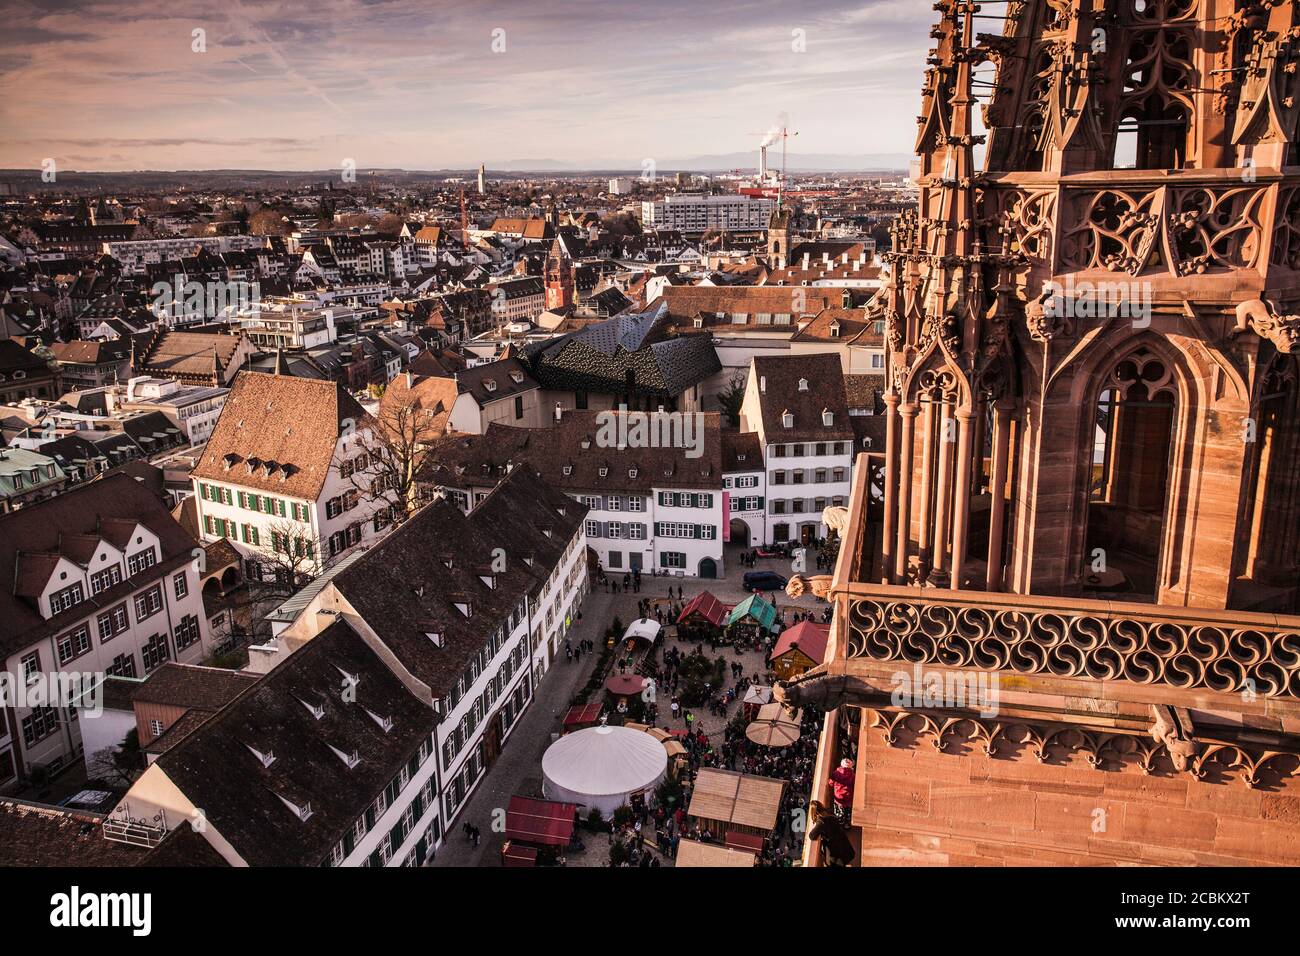 Munster church spire and high angle view of Christmas market, Basel, Switzerland Stock Photo